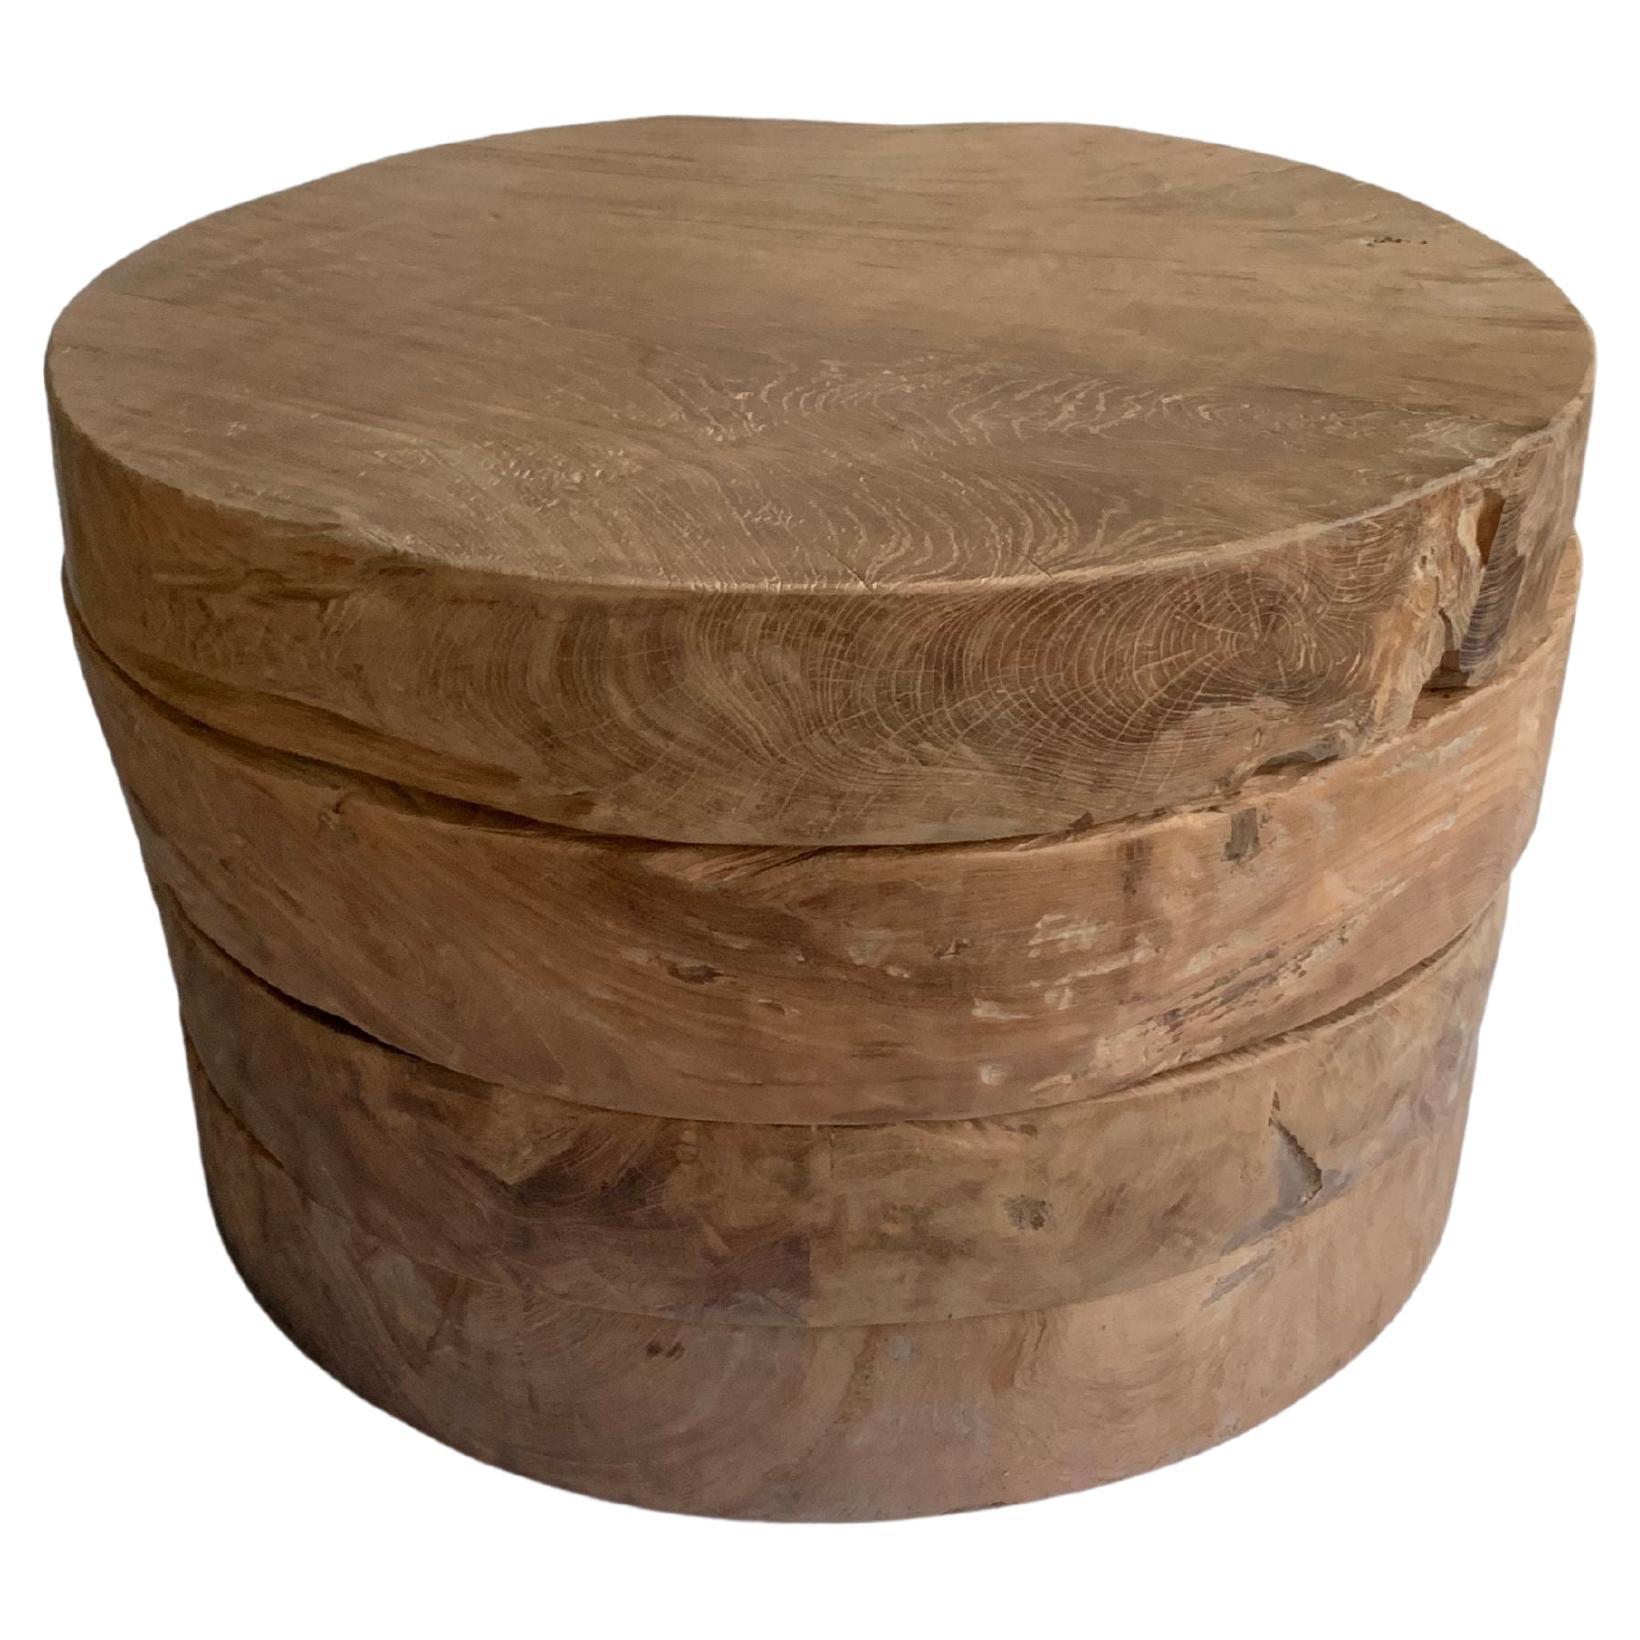 Sculptural Side Table Crafted from Round Solid Teak Wood Slabs